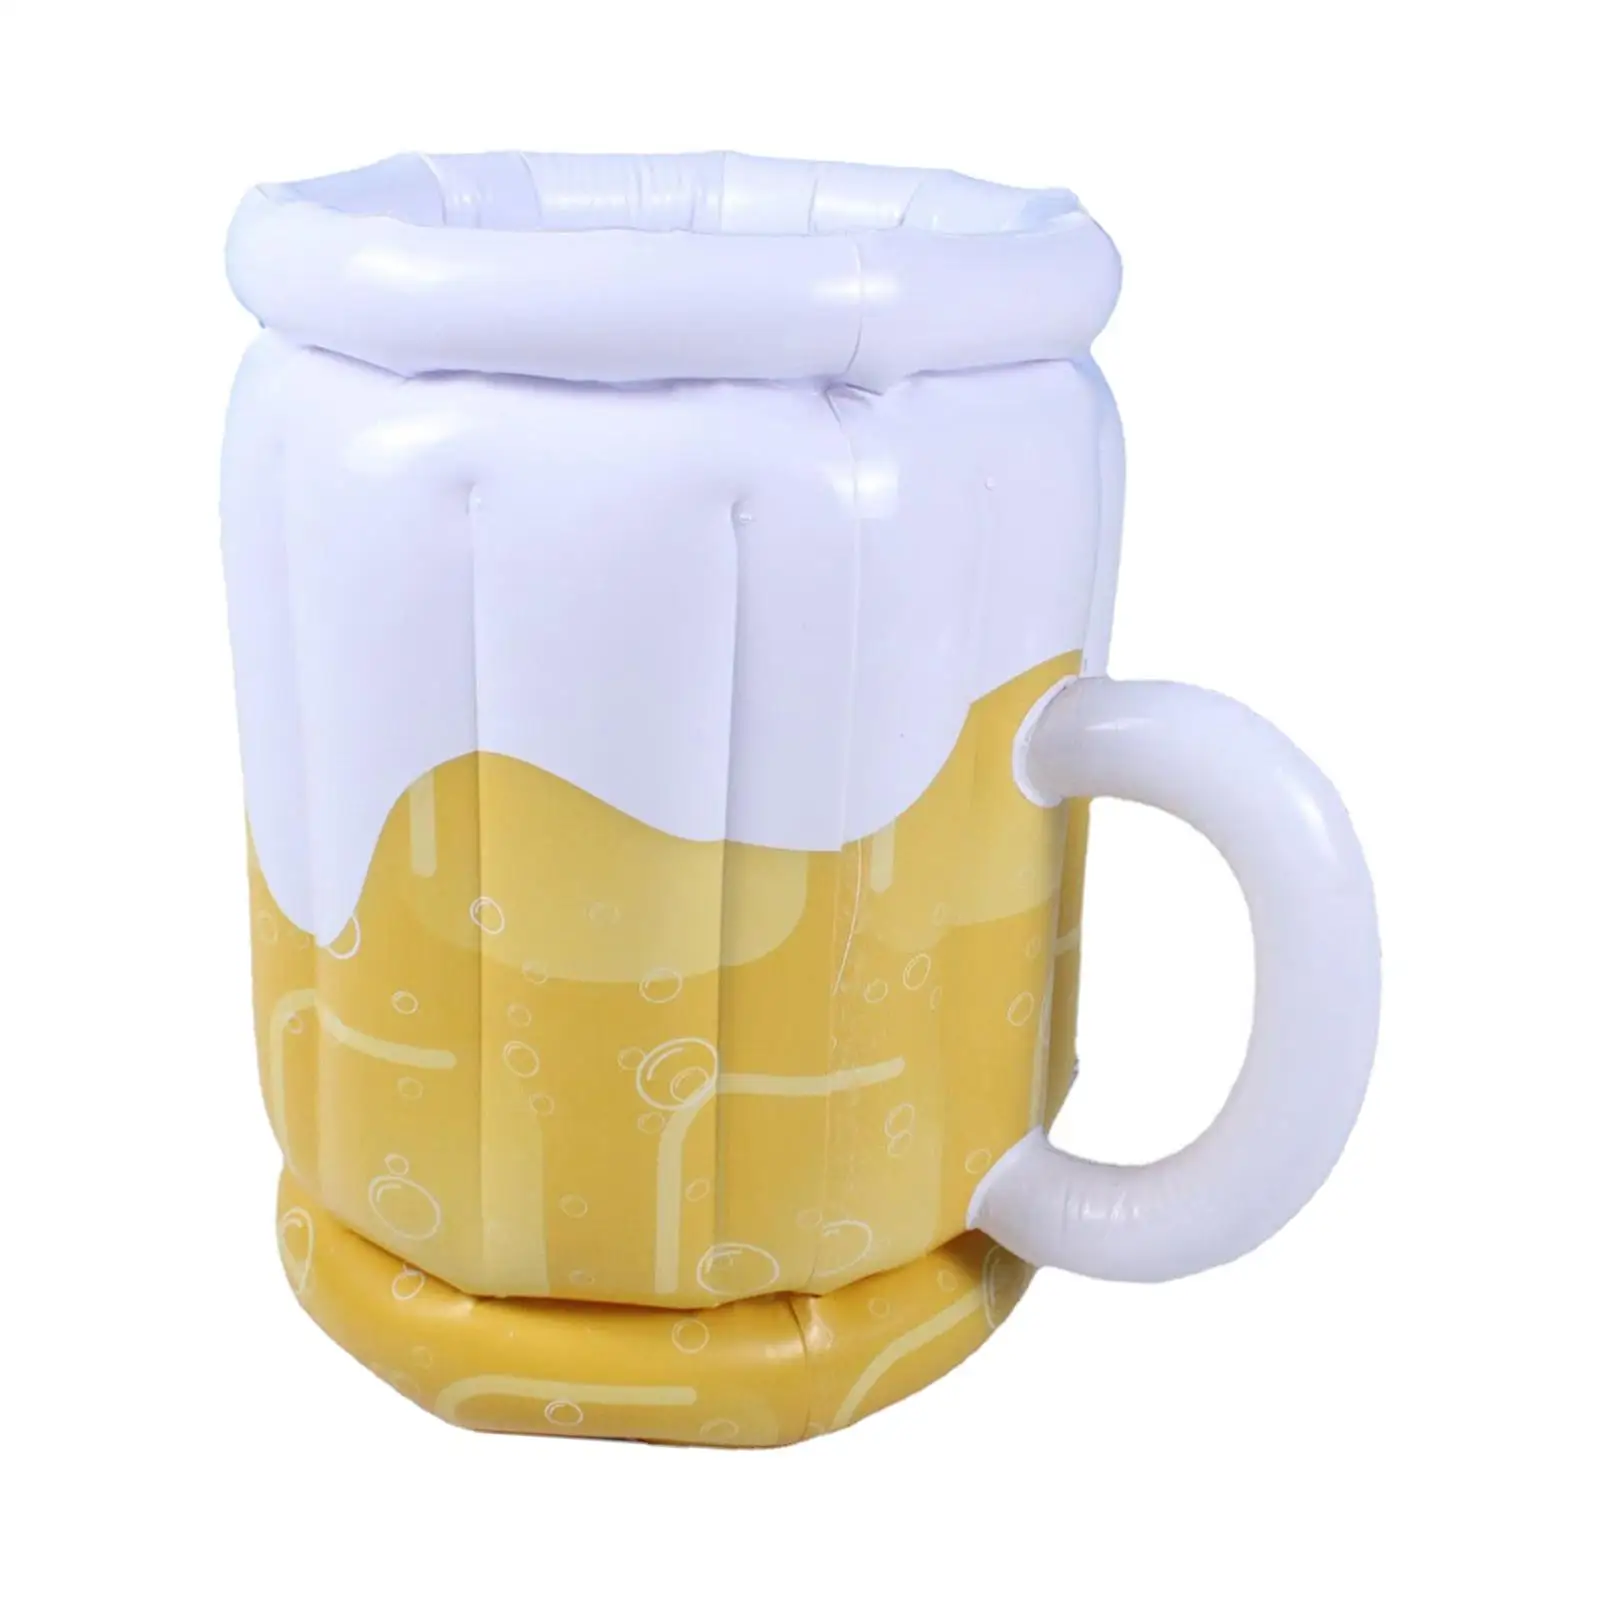 Inflatable Beer Mug Cooler Supplies Summer Beverage Holder Inflatable Drink Holder for Themed Party Picnic Beach Outdoor BBQ